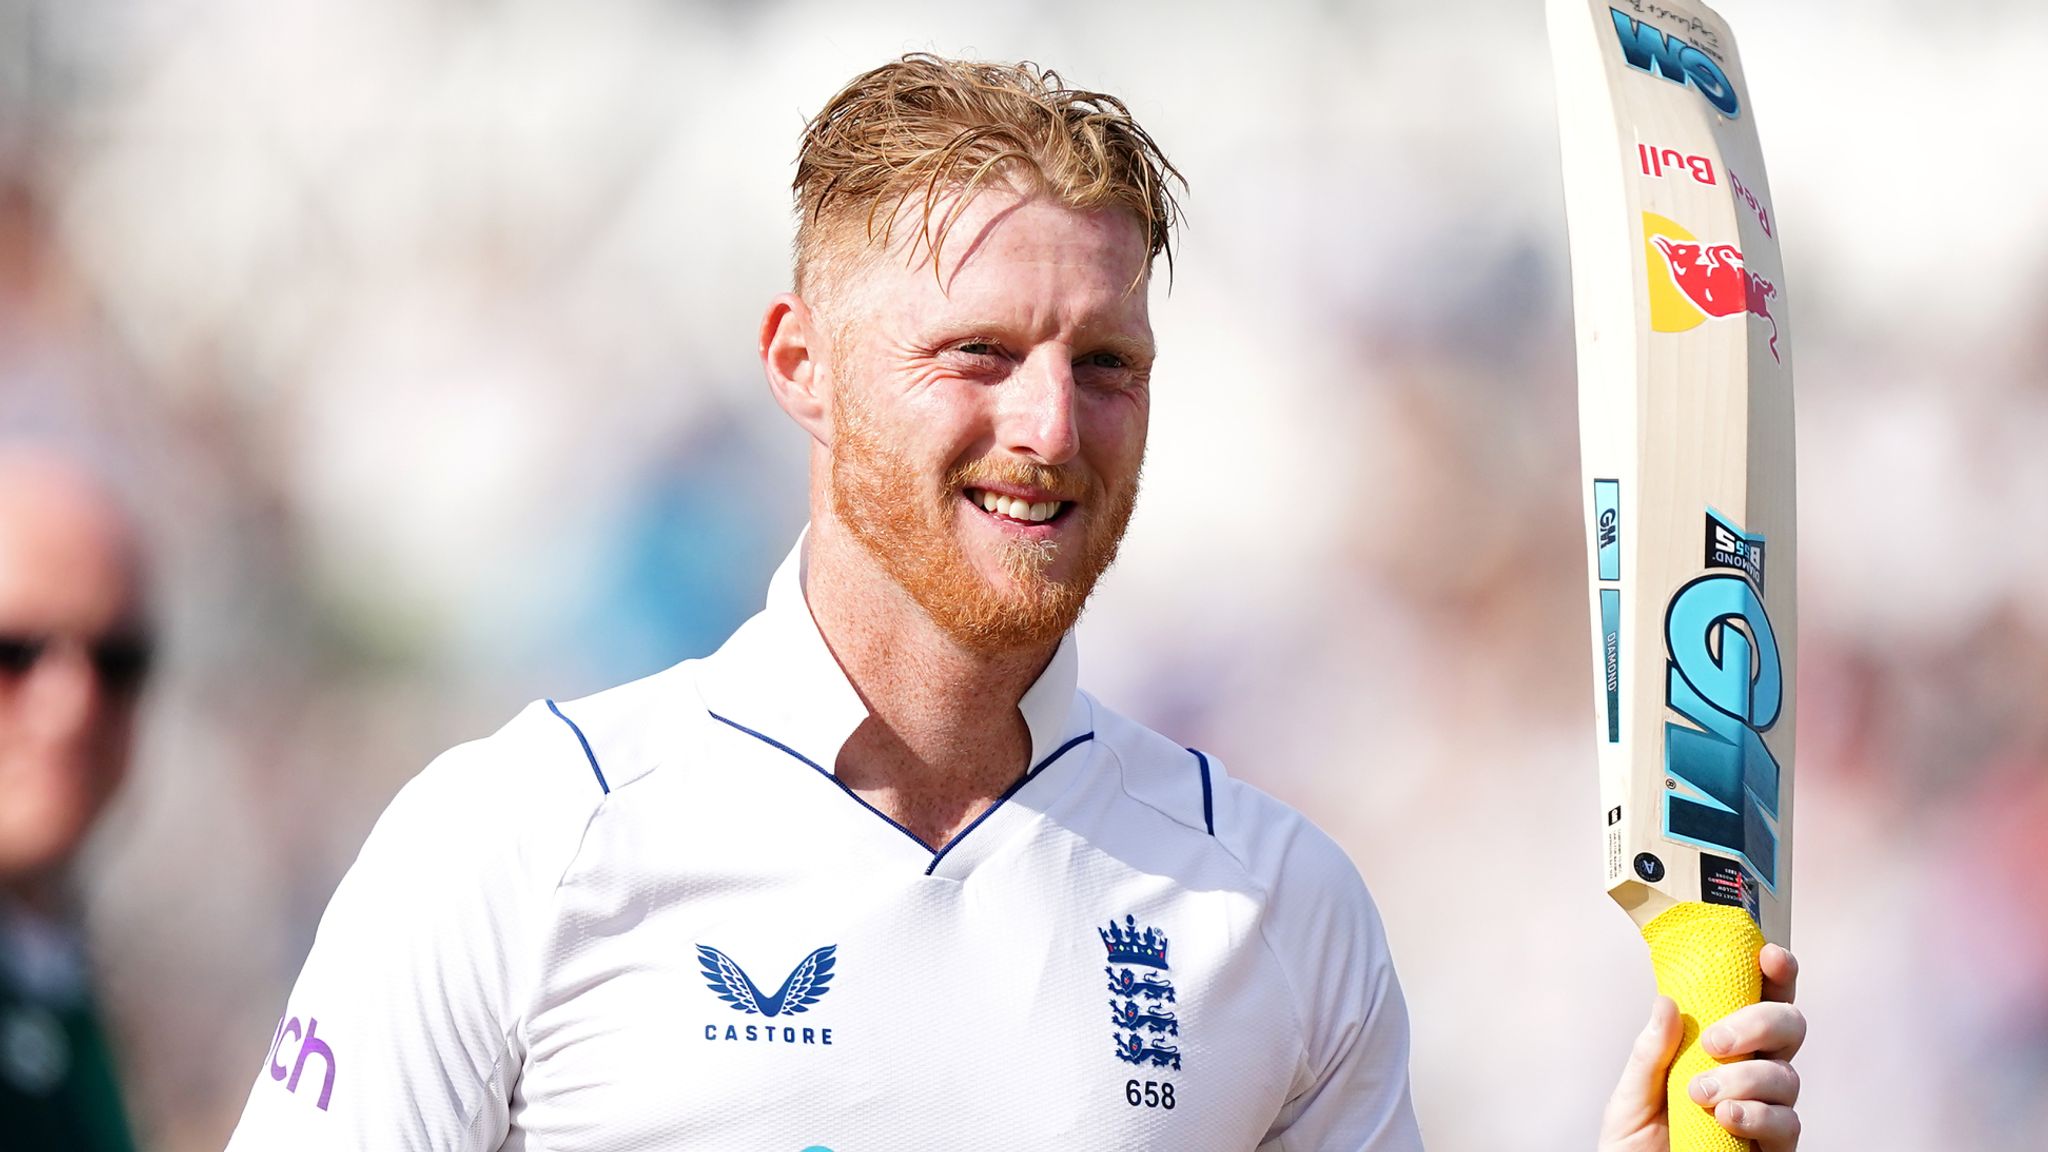 ‘Team is yet to play its best game’, says Ben Stokes